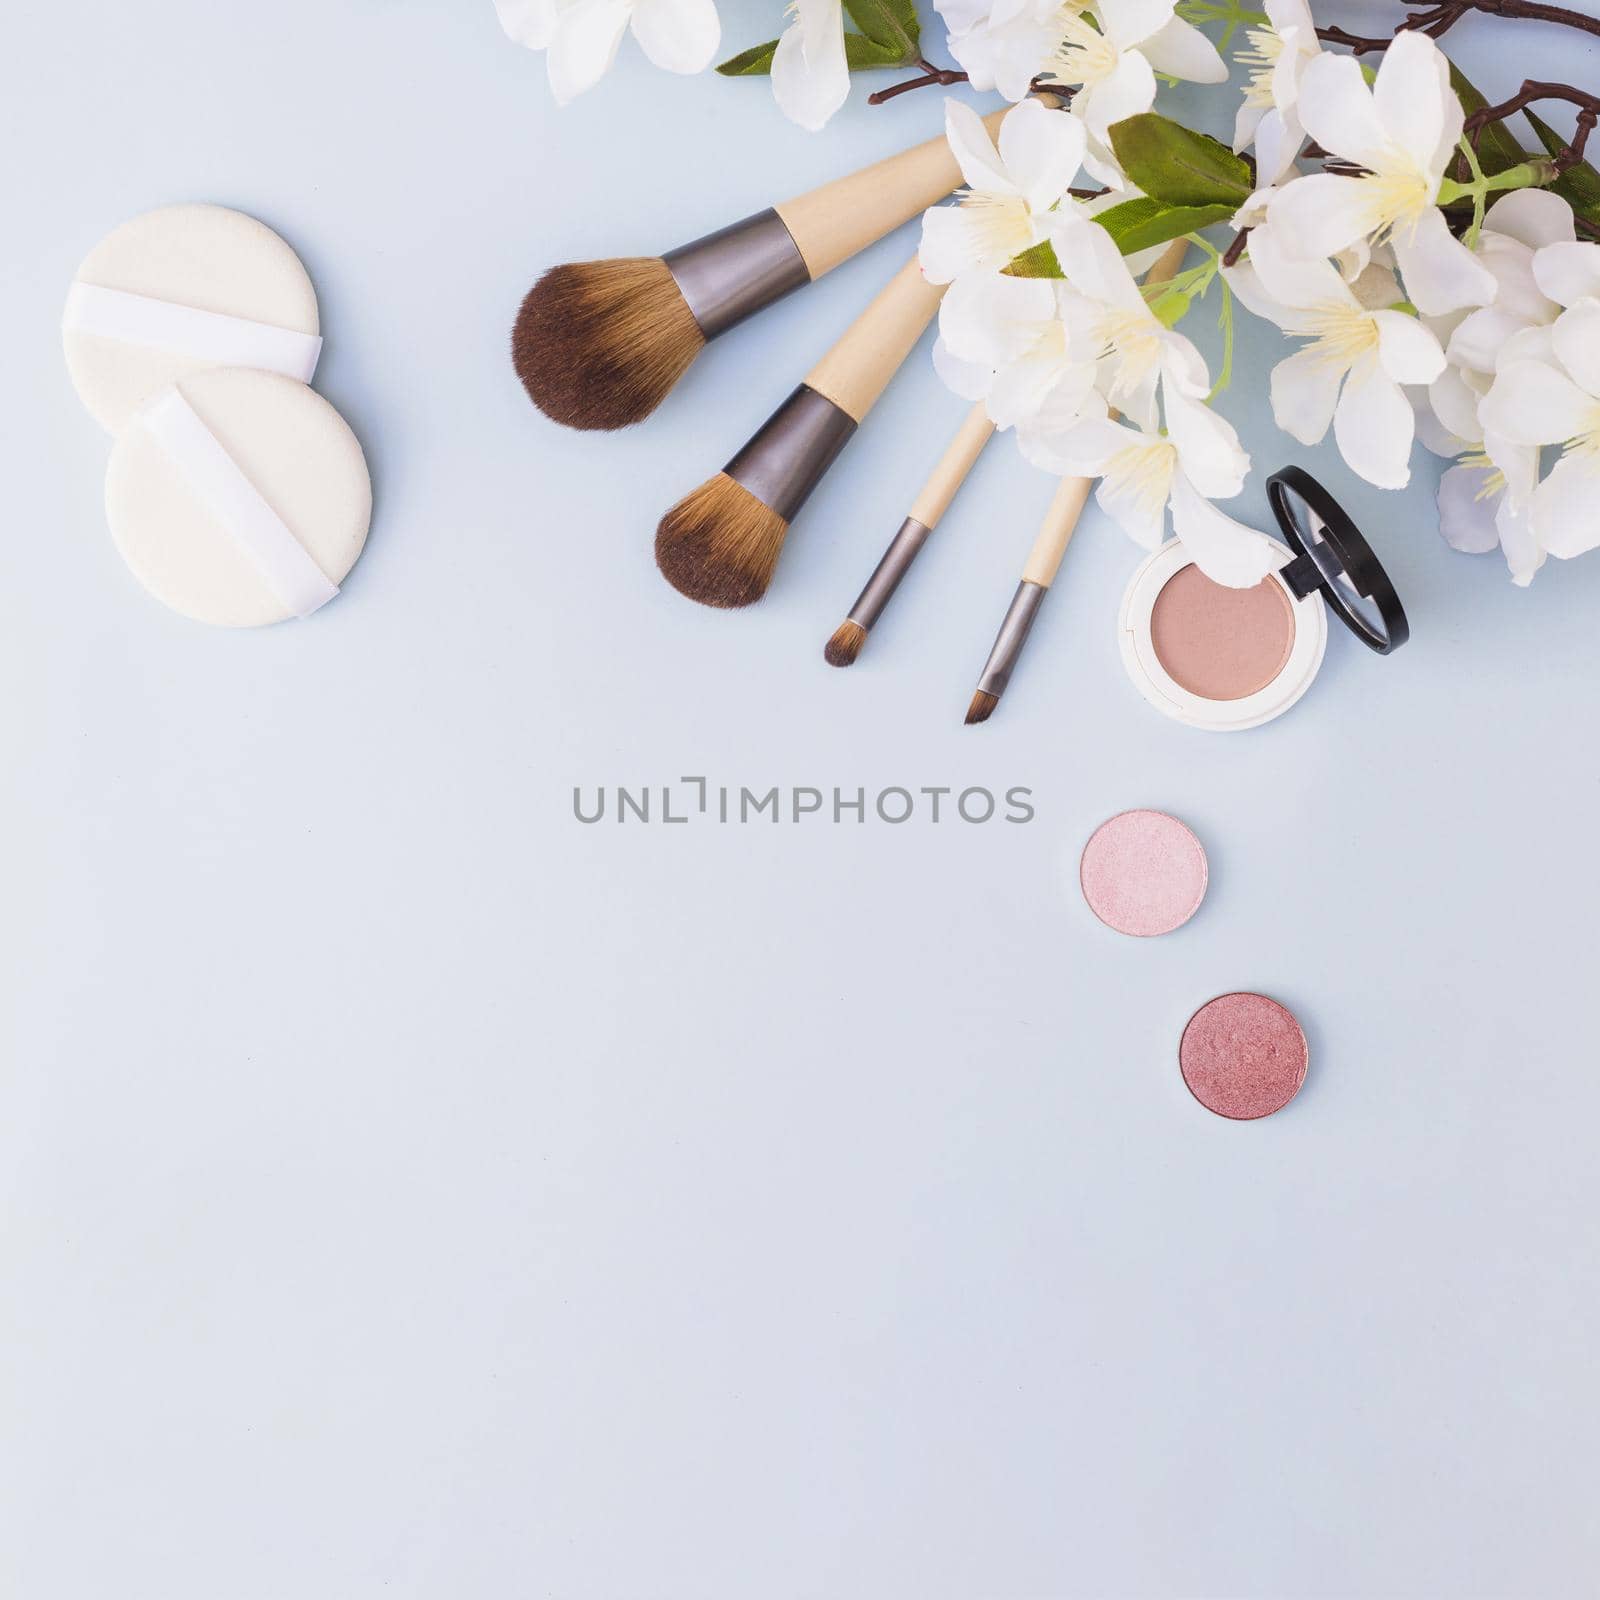 different type makeup brush sponge eye shadow blusher with white flowers blue background. High quality beautiful photo concept by Zahard